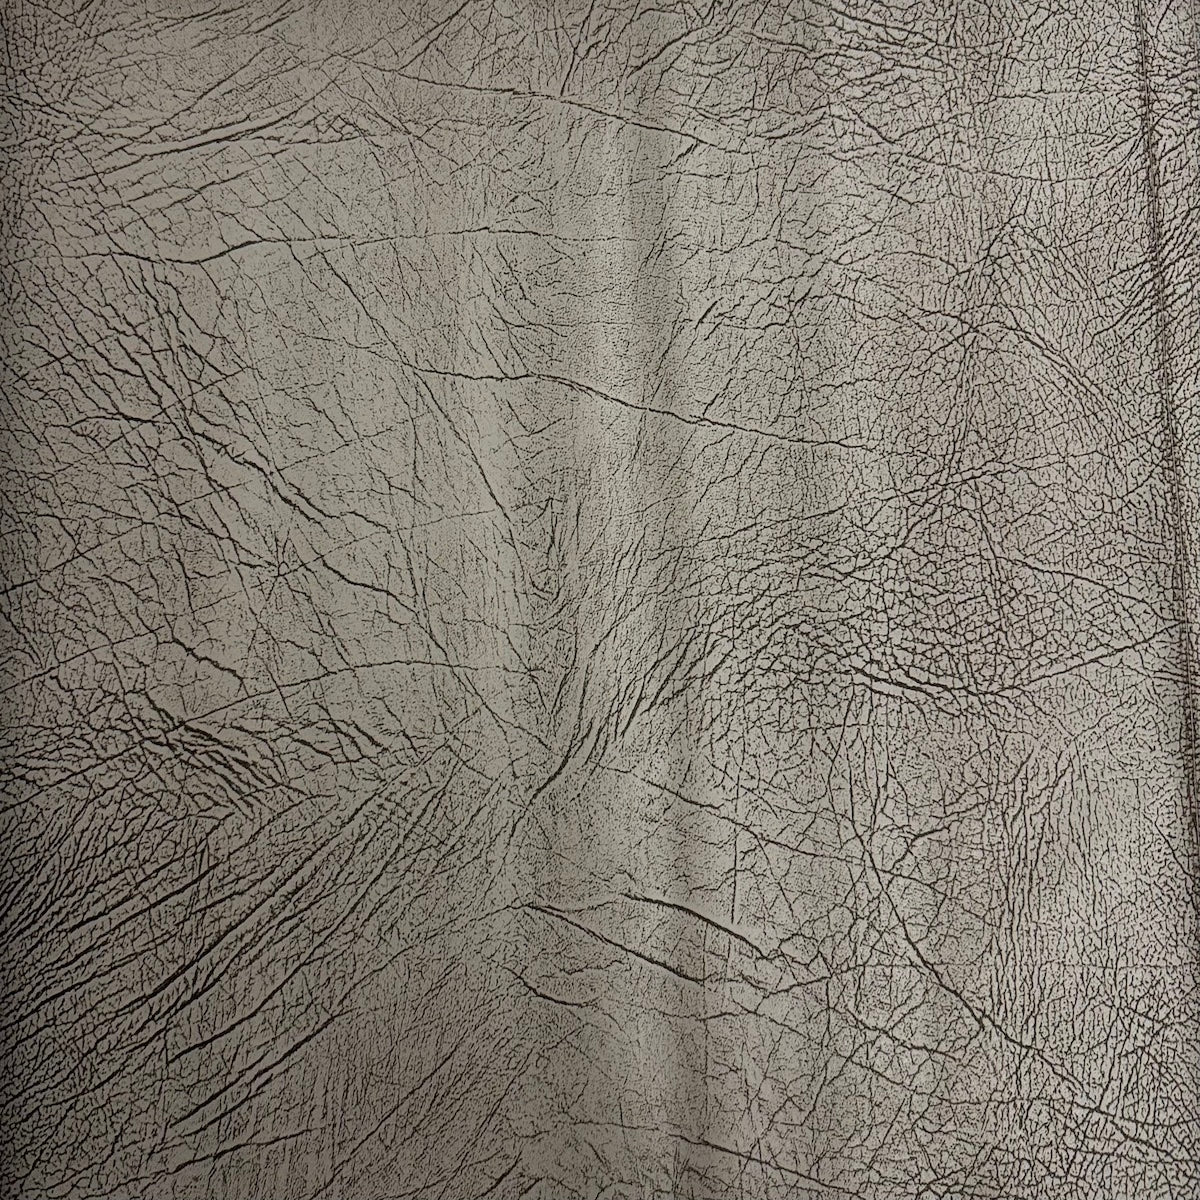 Gray Vintage Distressed Faux Leather Suede Vinyl Fabric